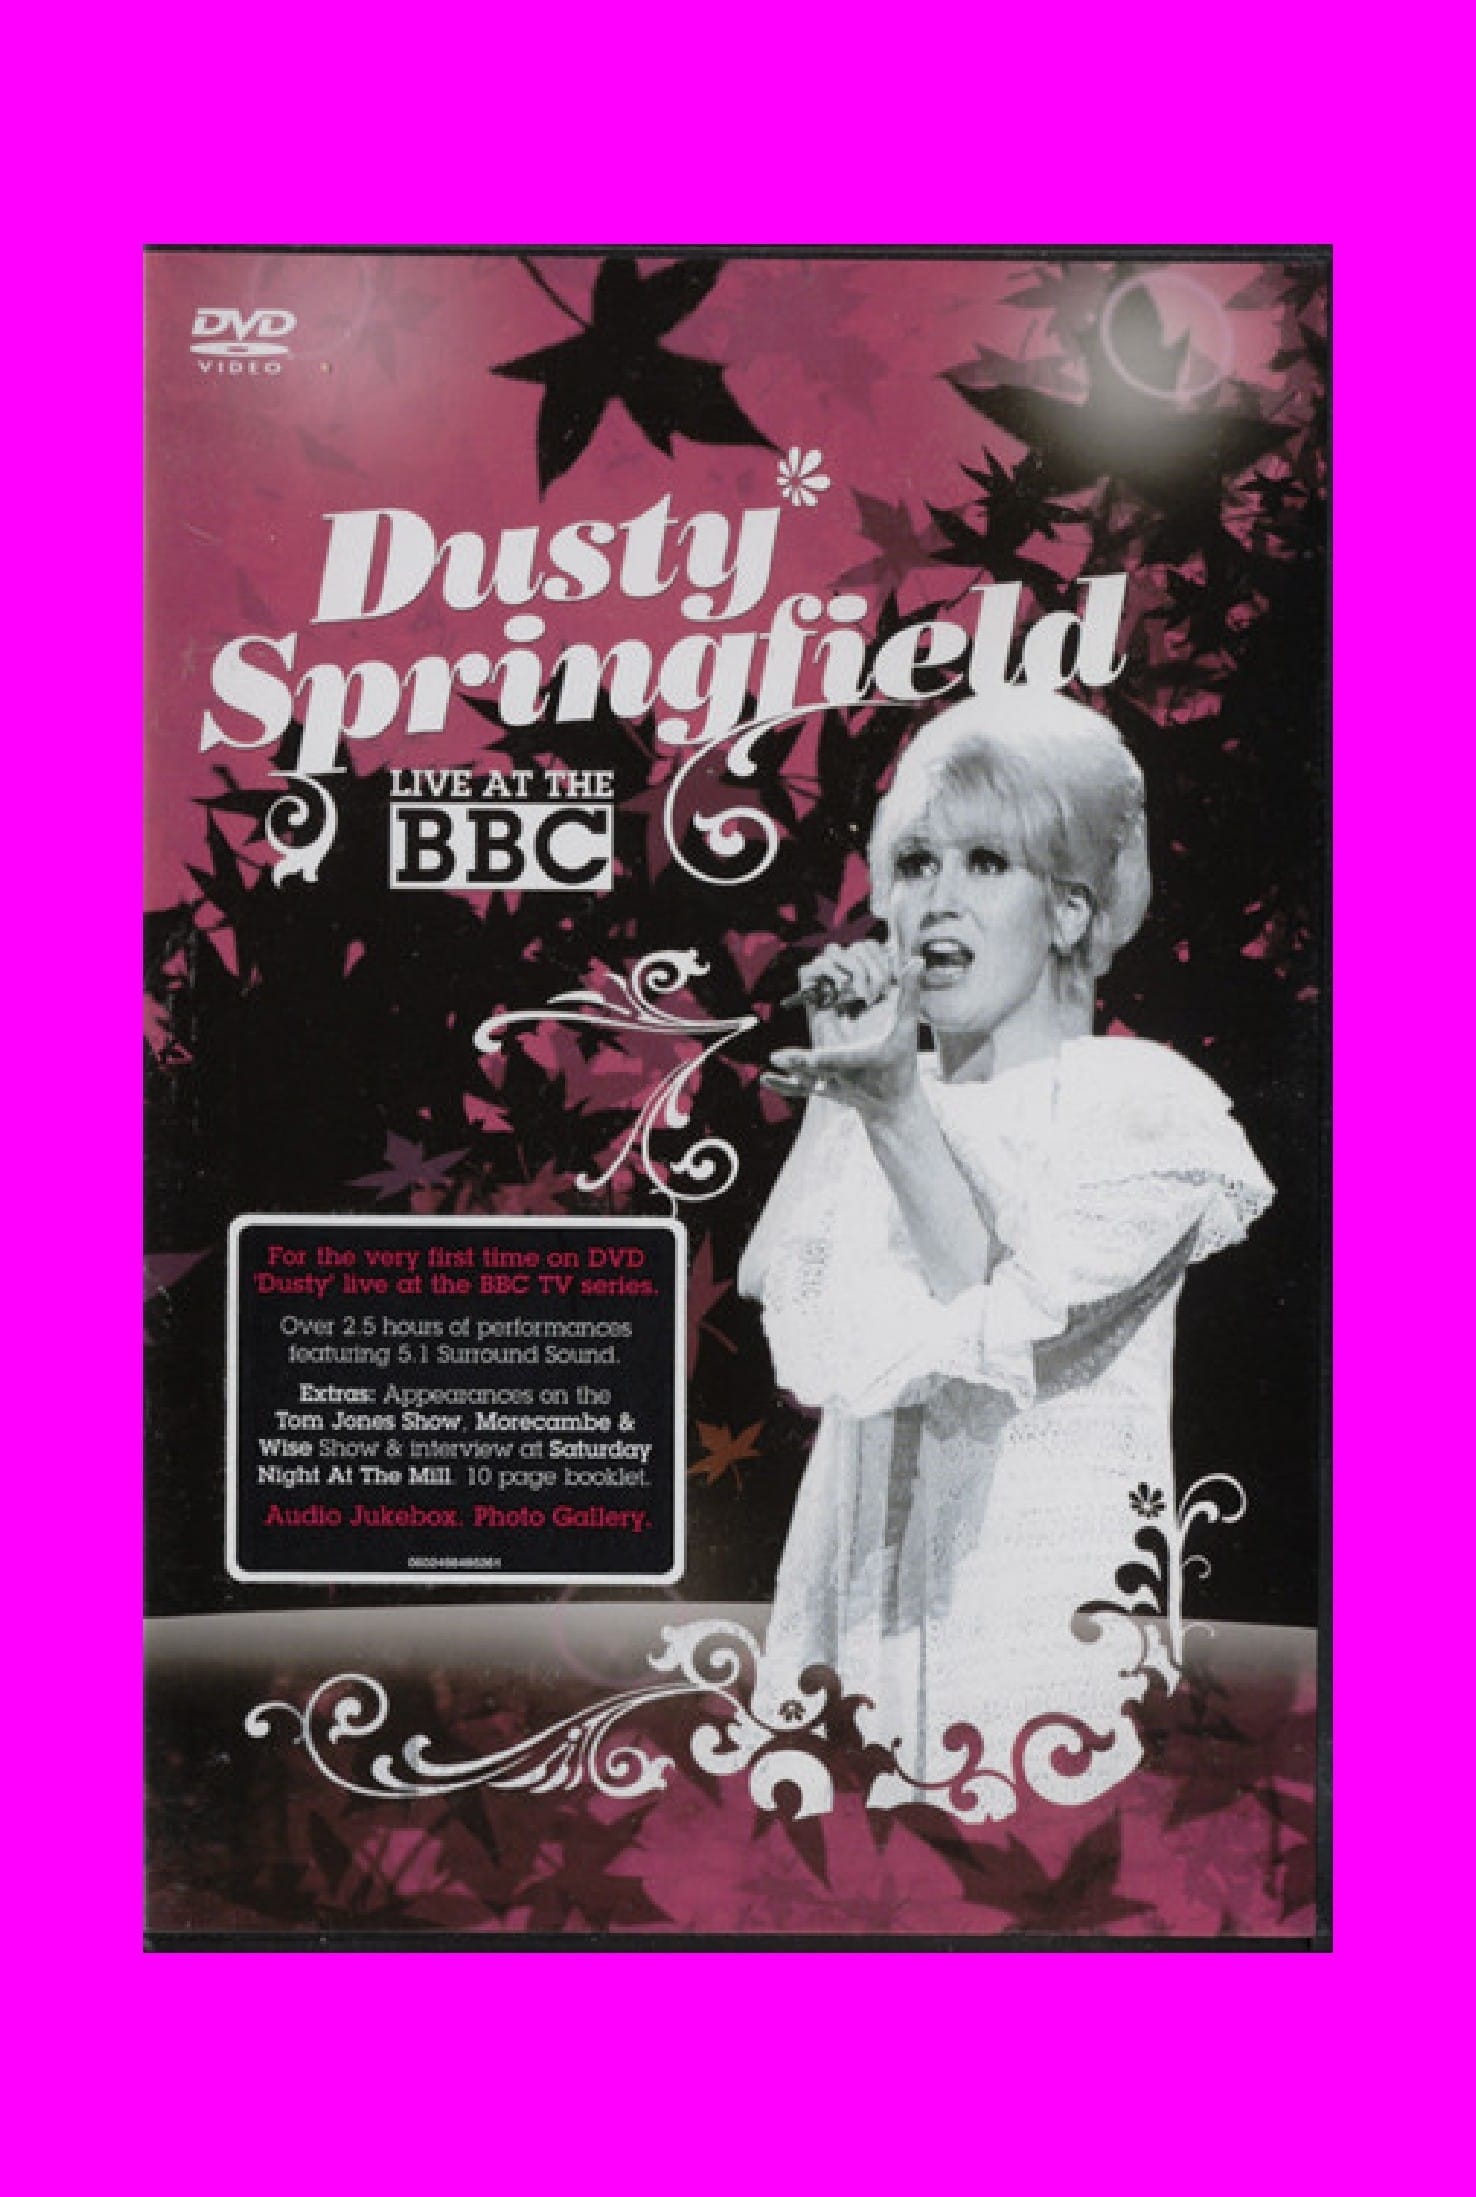 Dusty Springfield at the BBC: Volume One